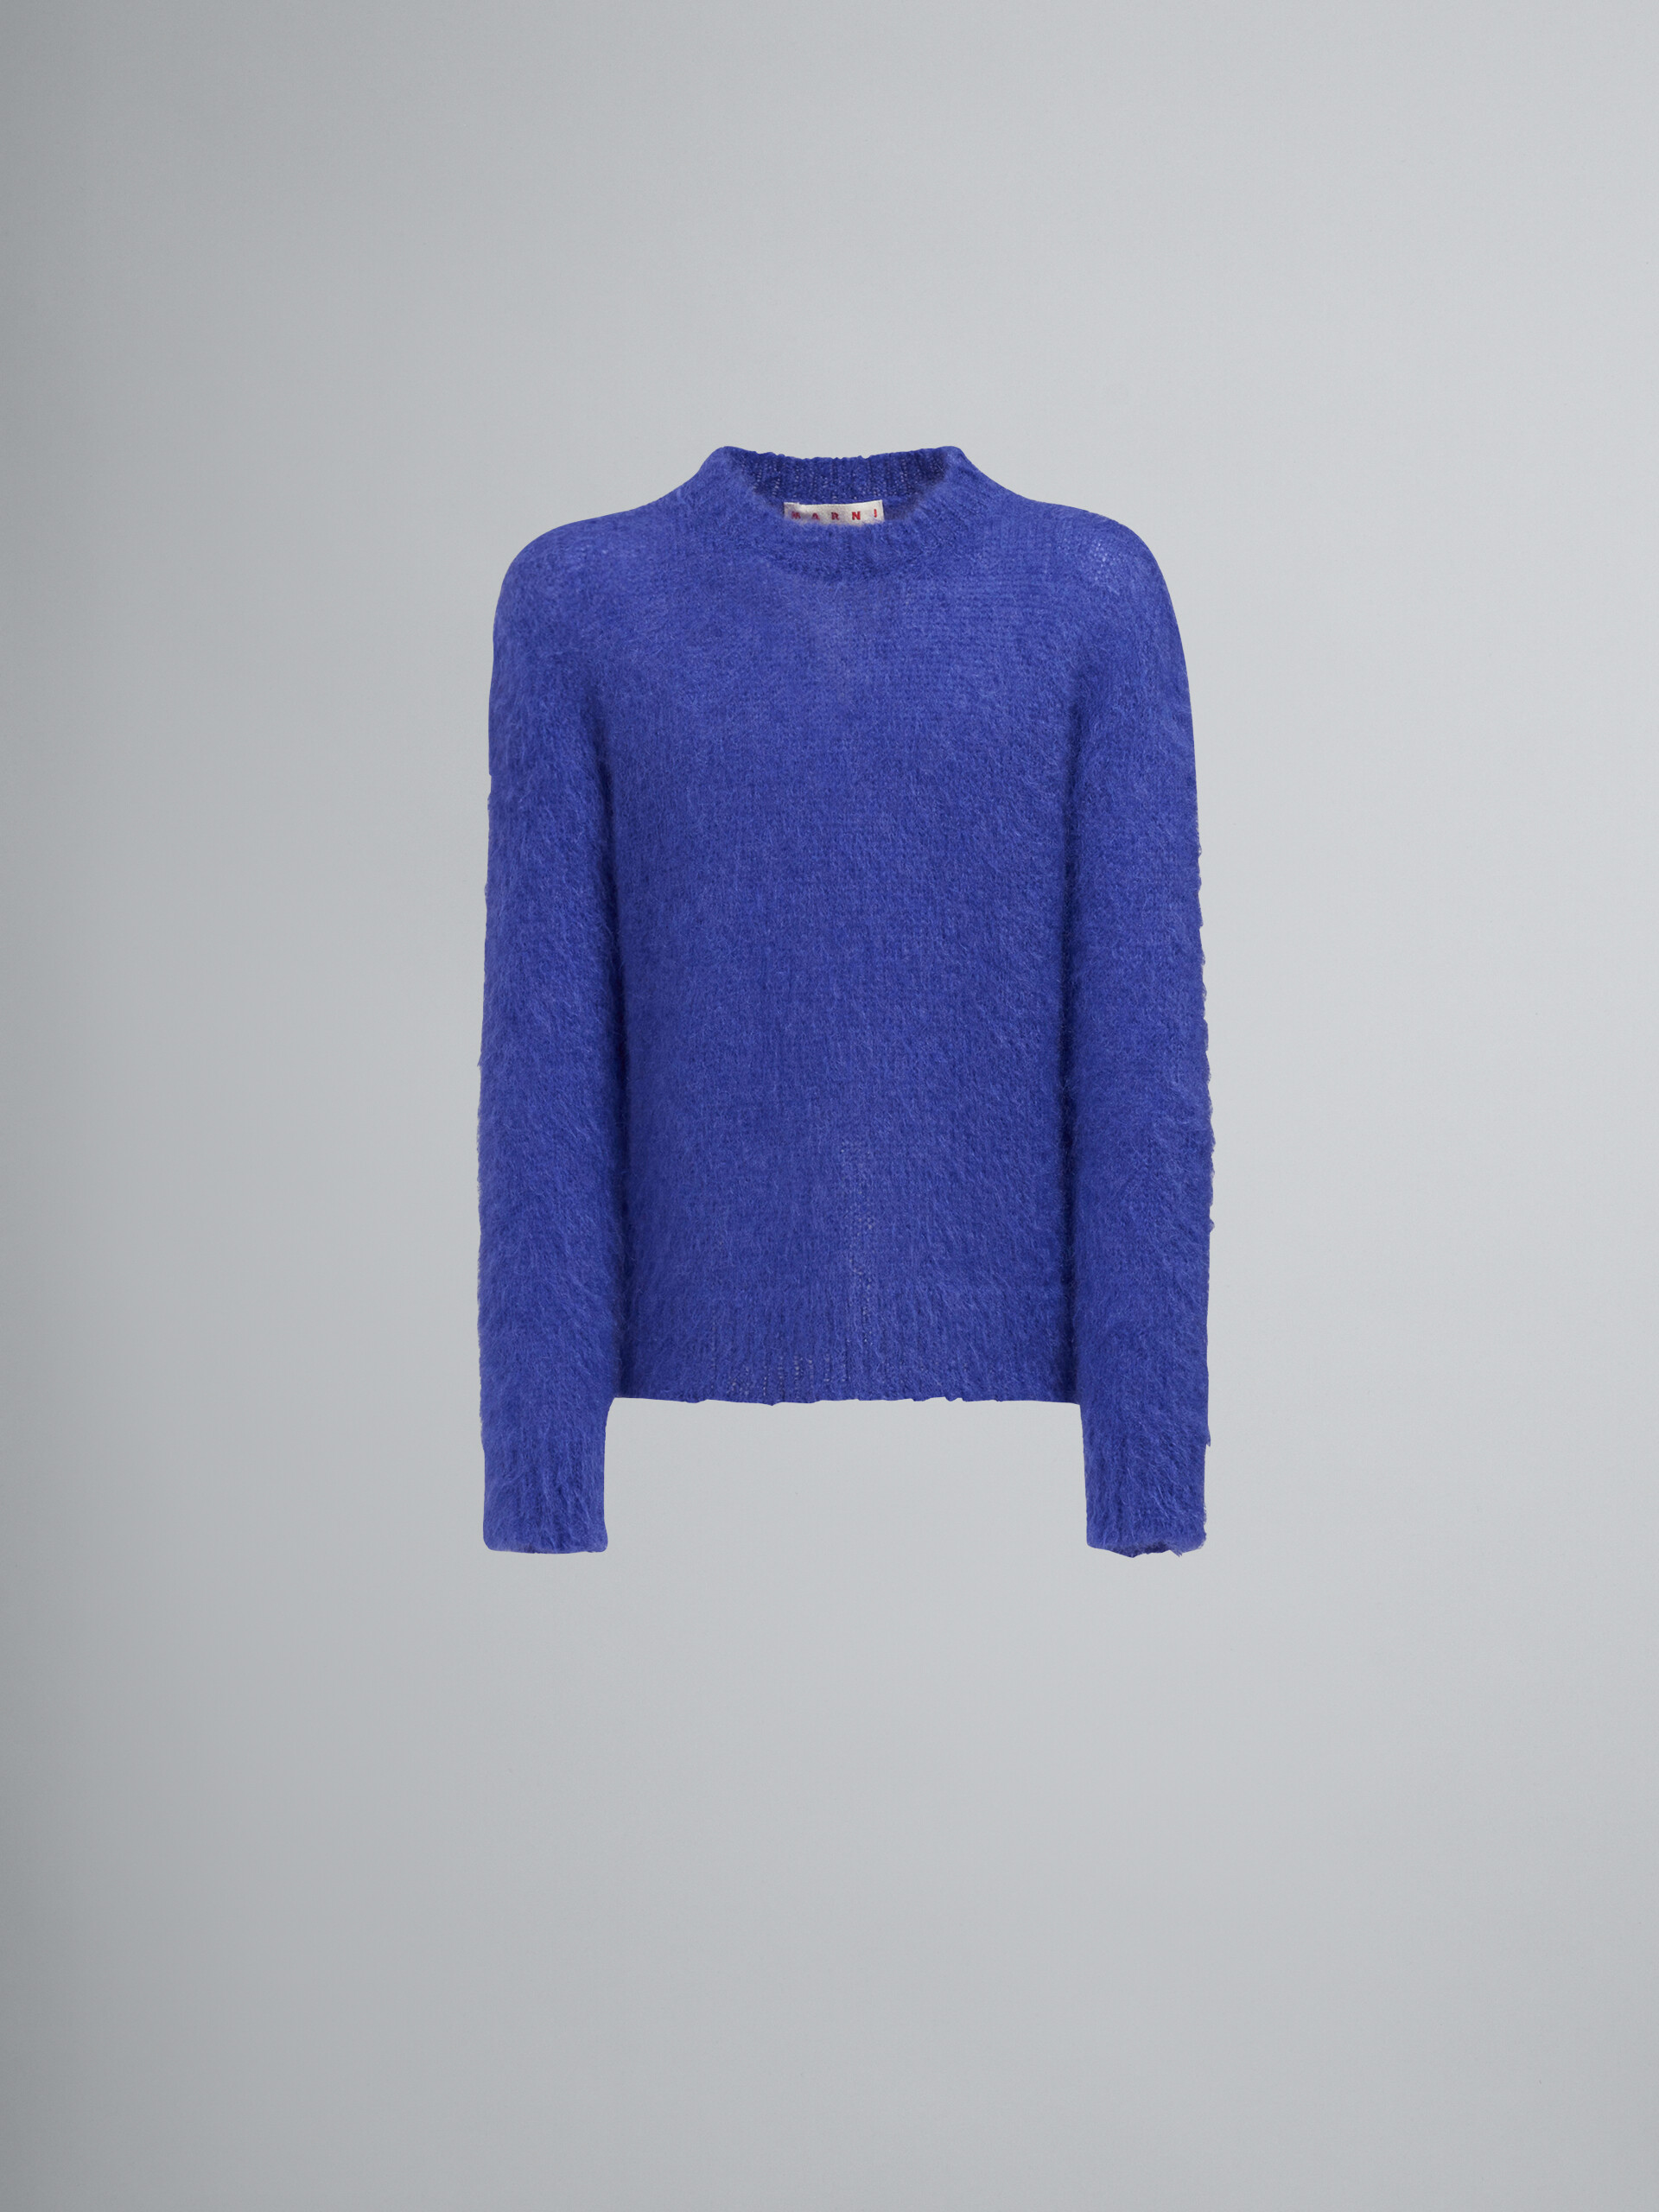 Mohair and wool crewneck sweater - Pullovers - Image 1